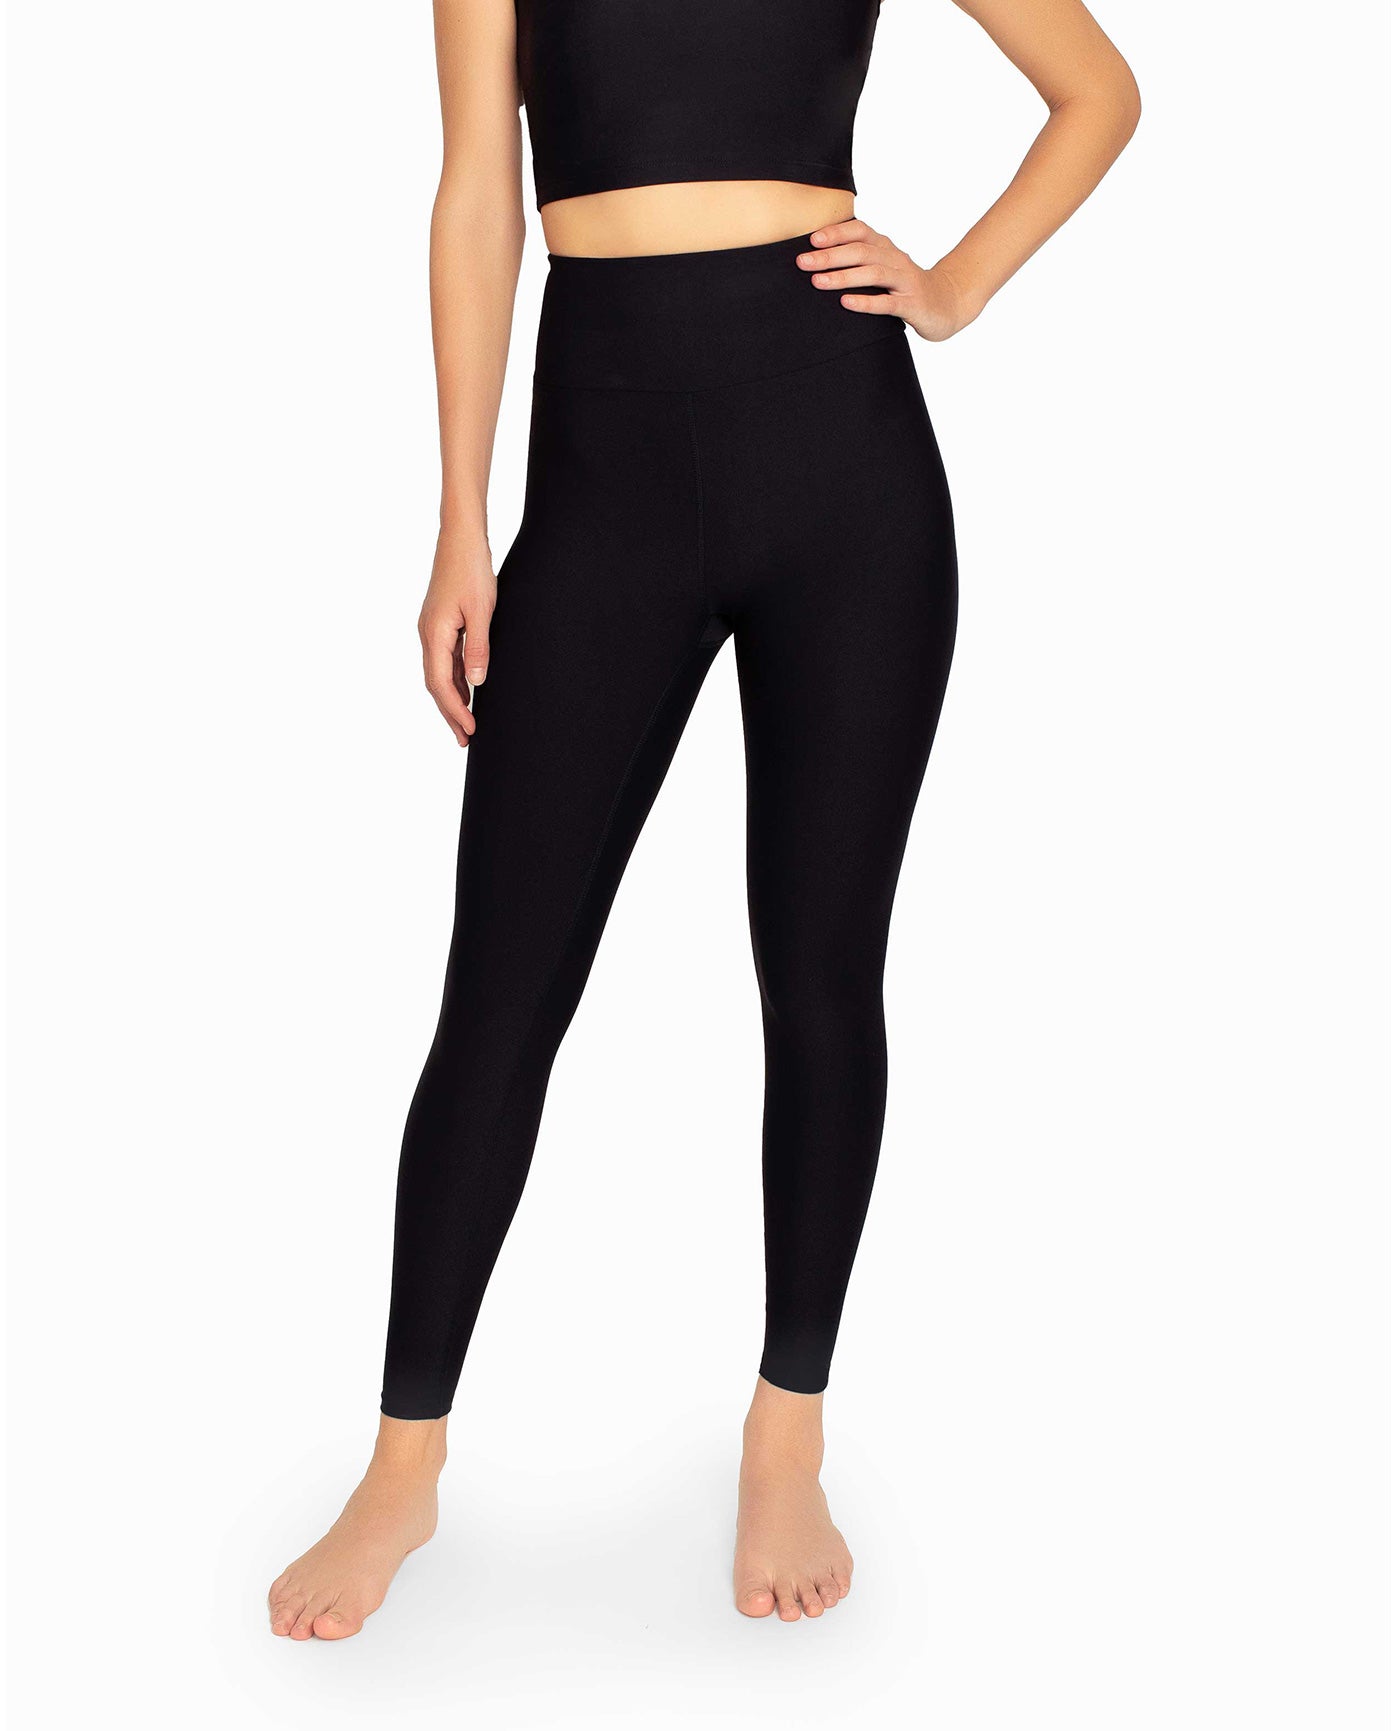 Nicole Miller Leggings for Women with Pockets - Workout Leggings Pack and  Sheer Mesh - High Waisted Tummy Control Yoga Pants Leopard Black at   Women's Clothing store